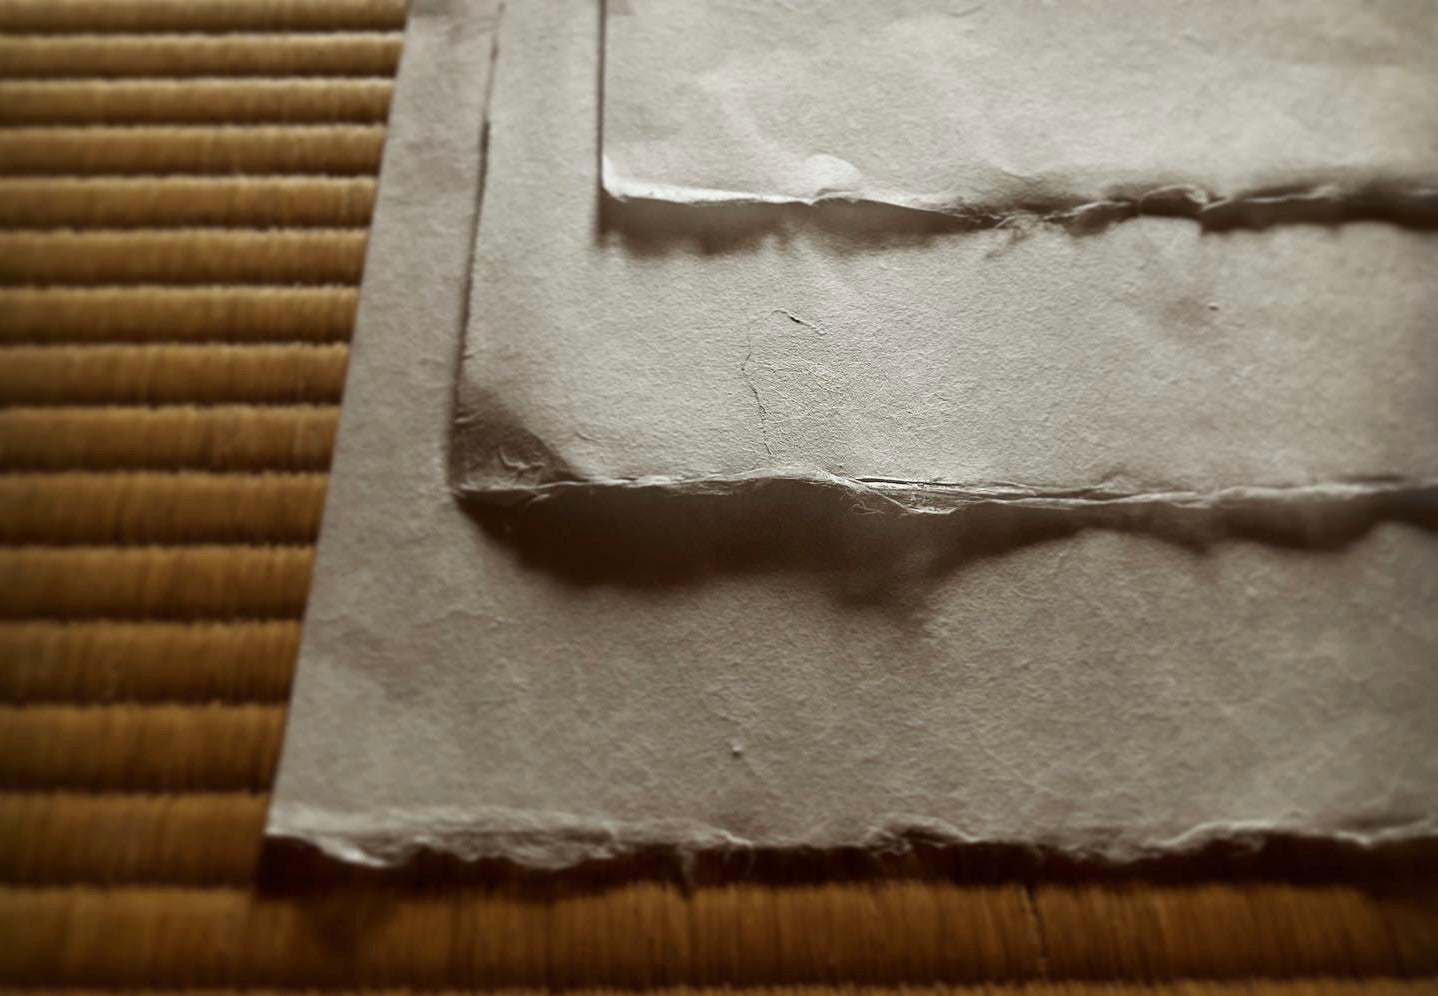 Japanese Paper (Washi) for dye